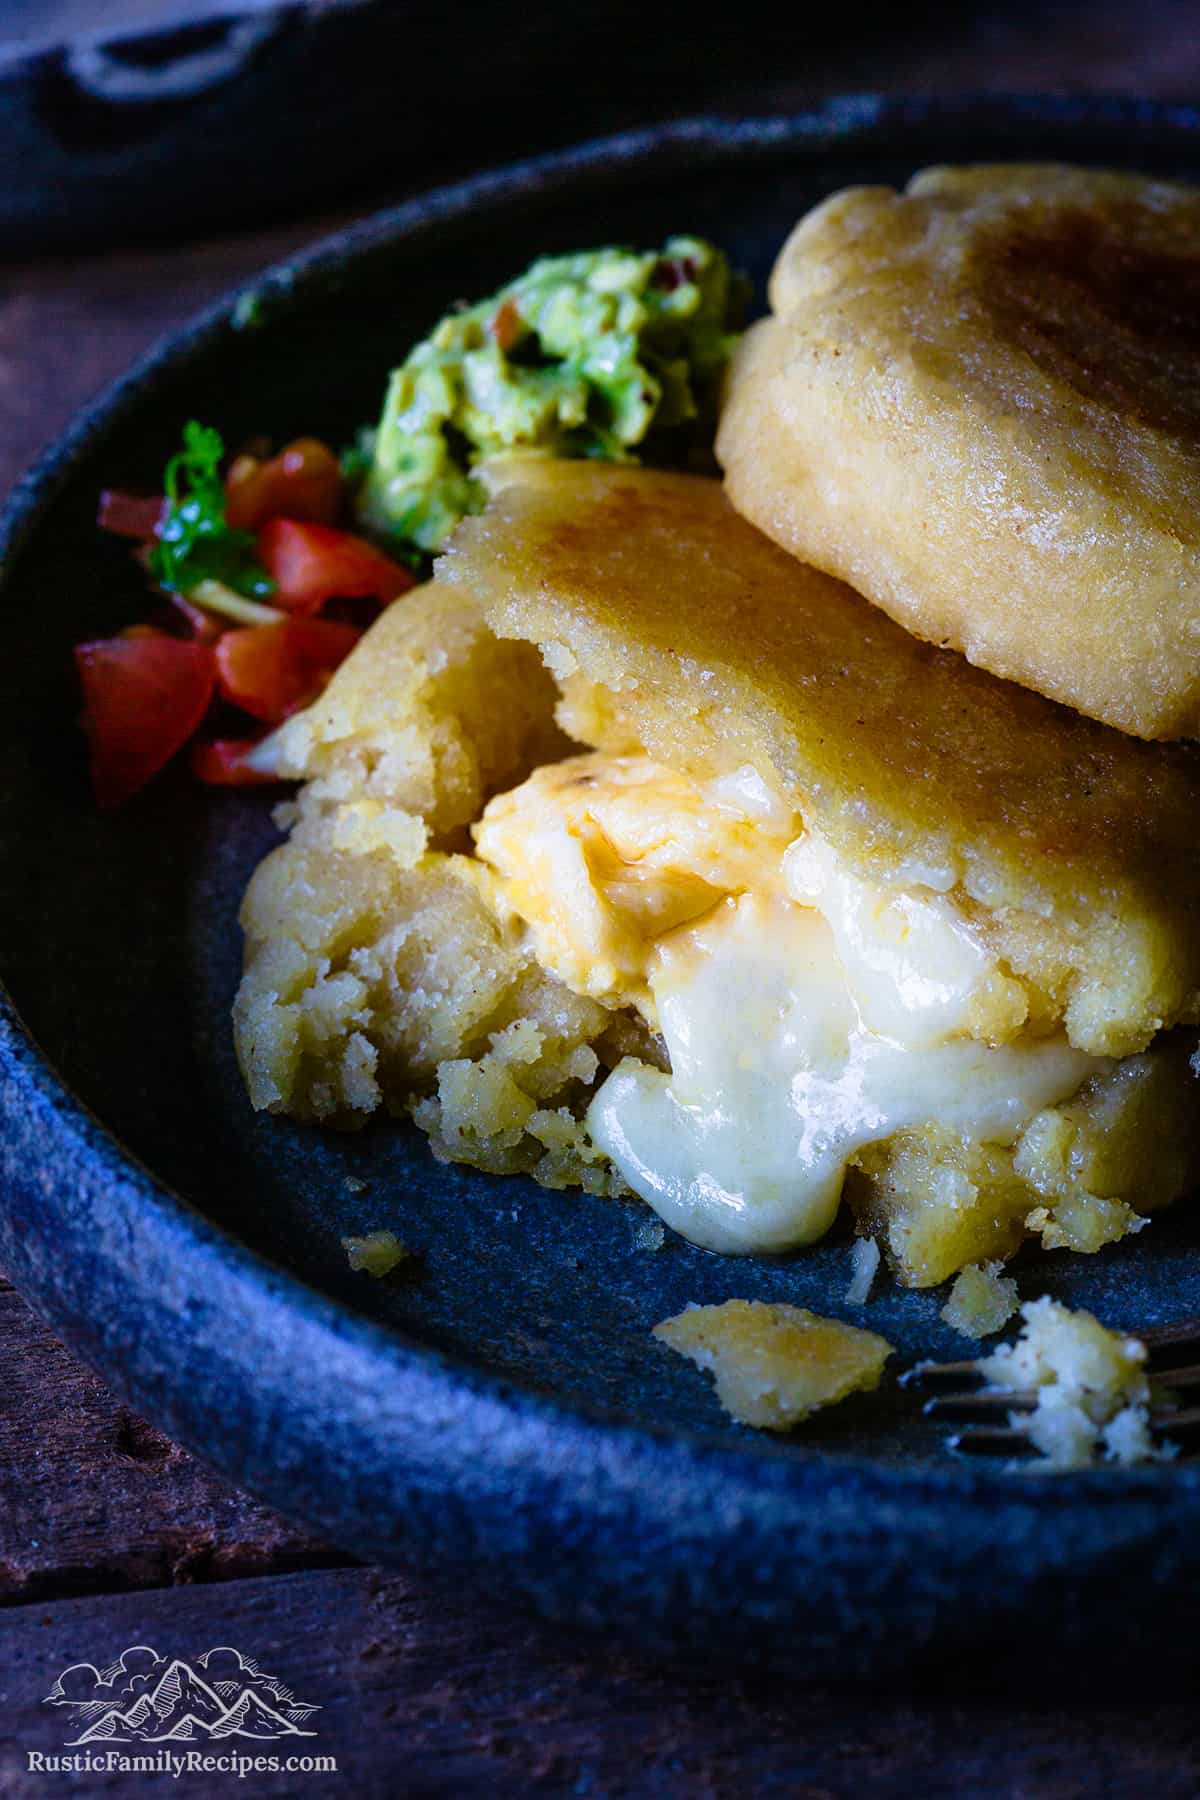 Arepas stuffed with scrambled eggs and cheese on a plate